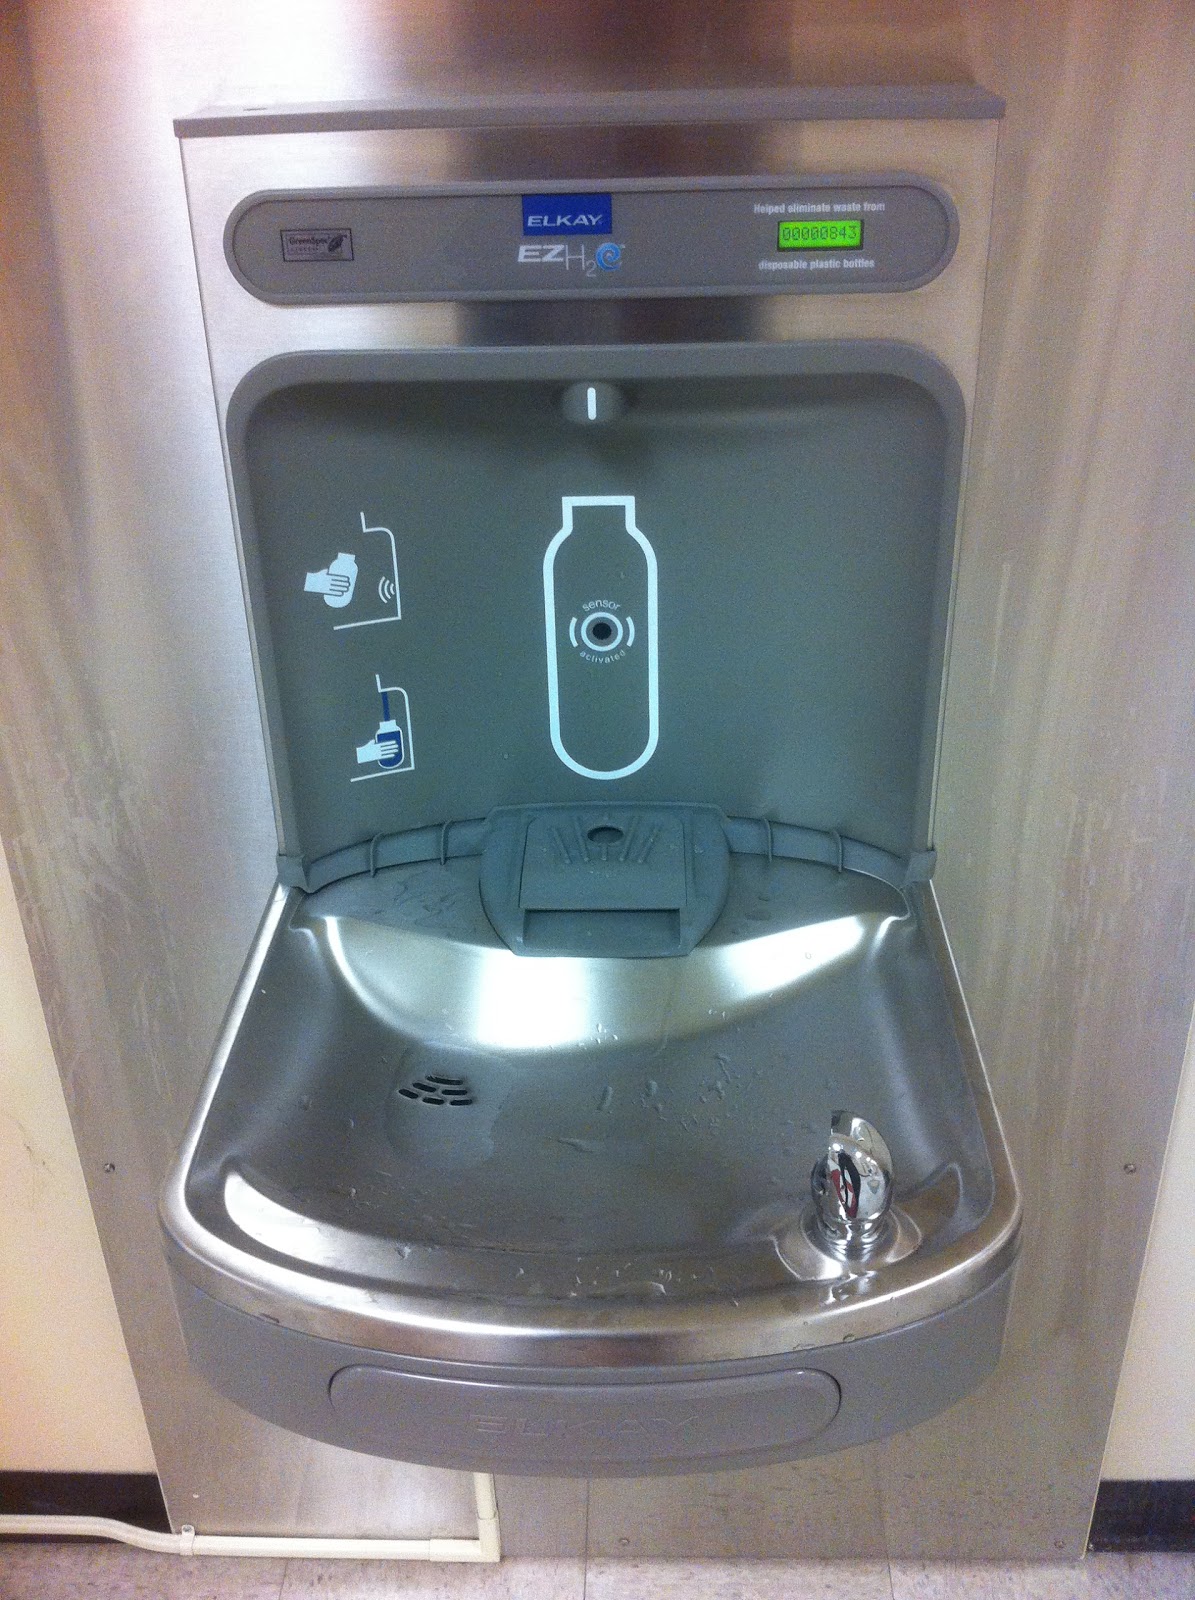 MacNeill - Home of the Ravens: NEW Water refill station